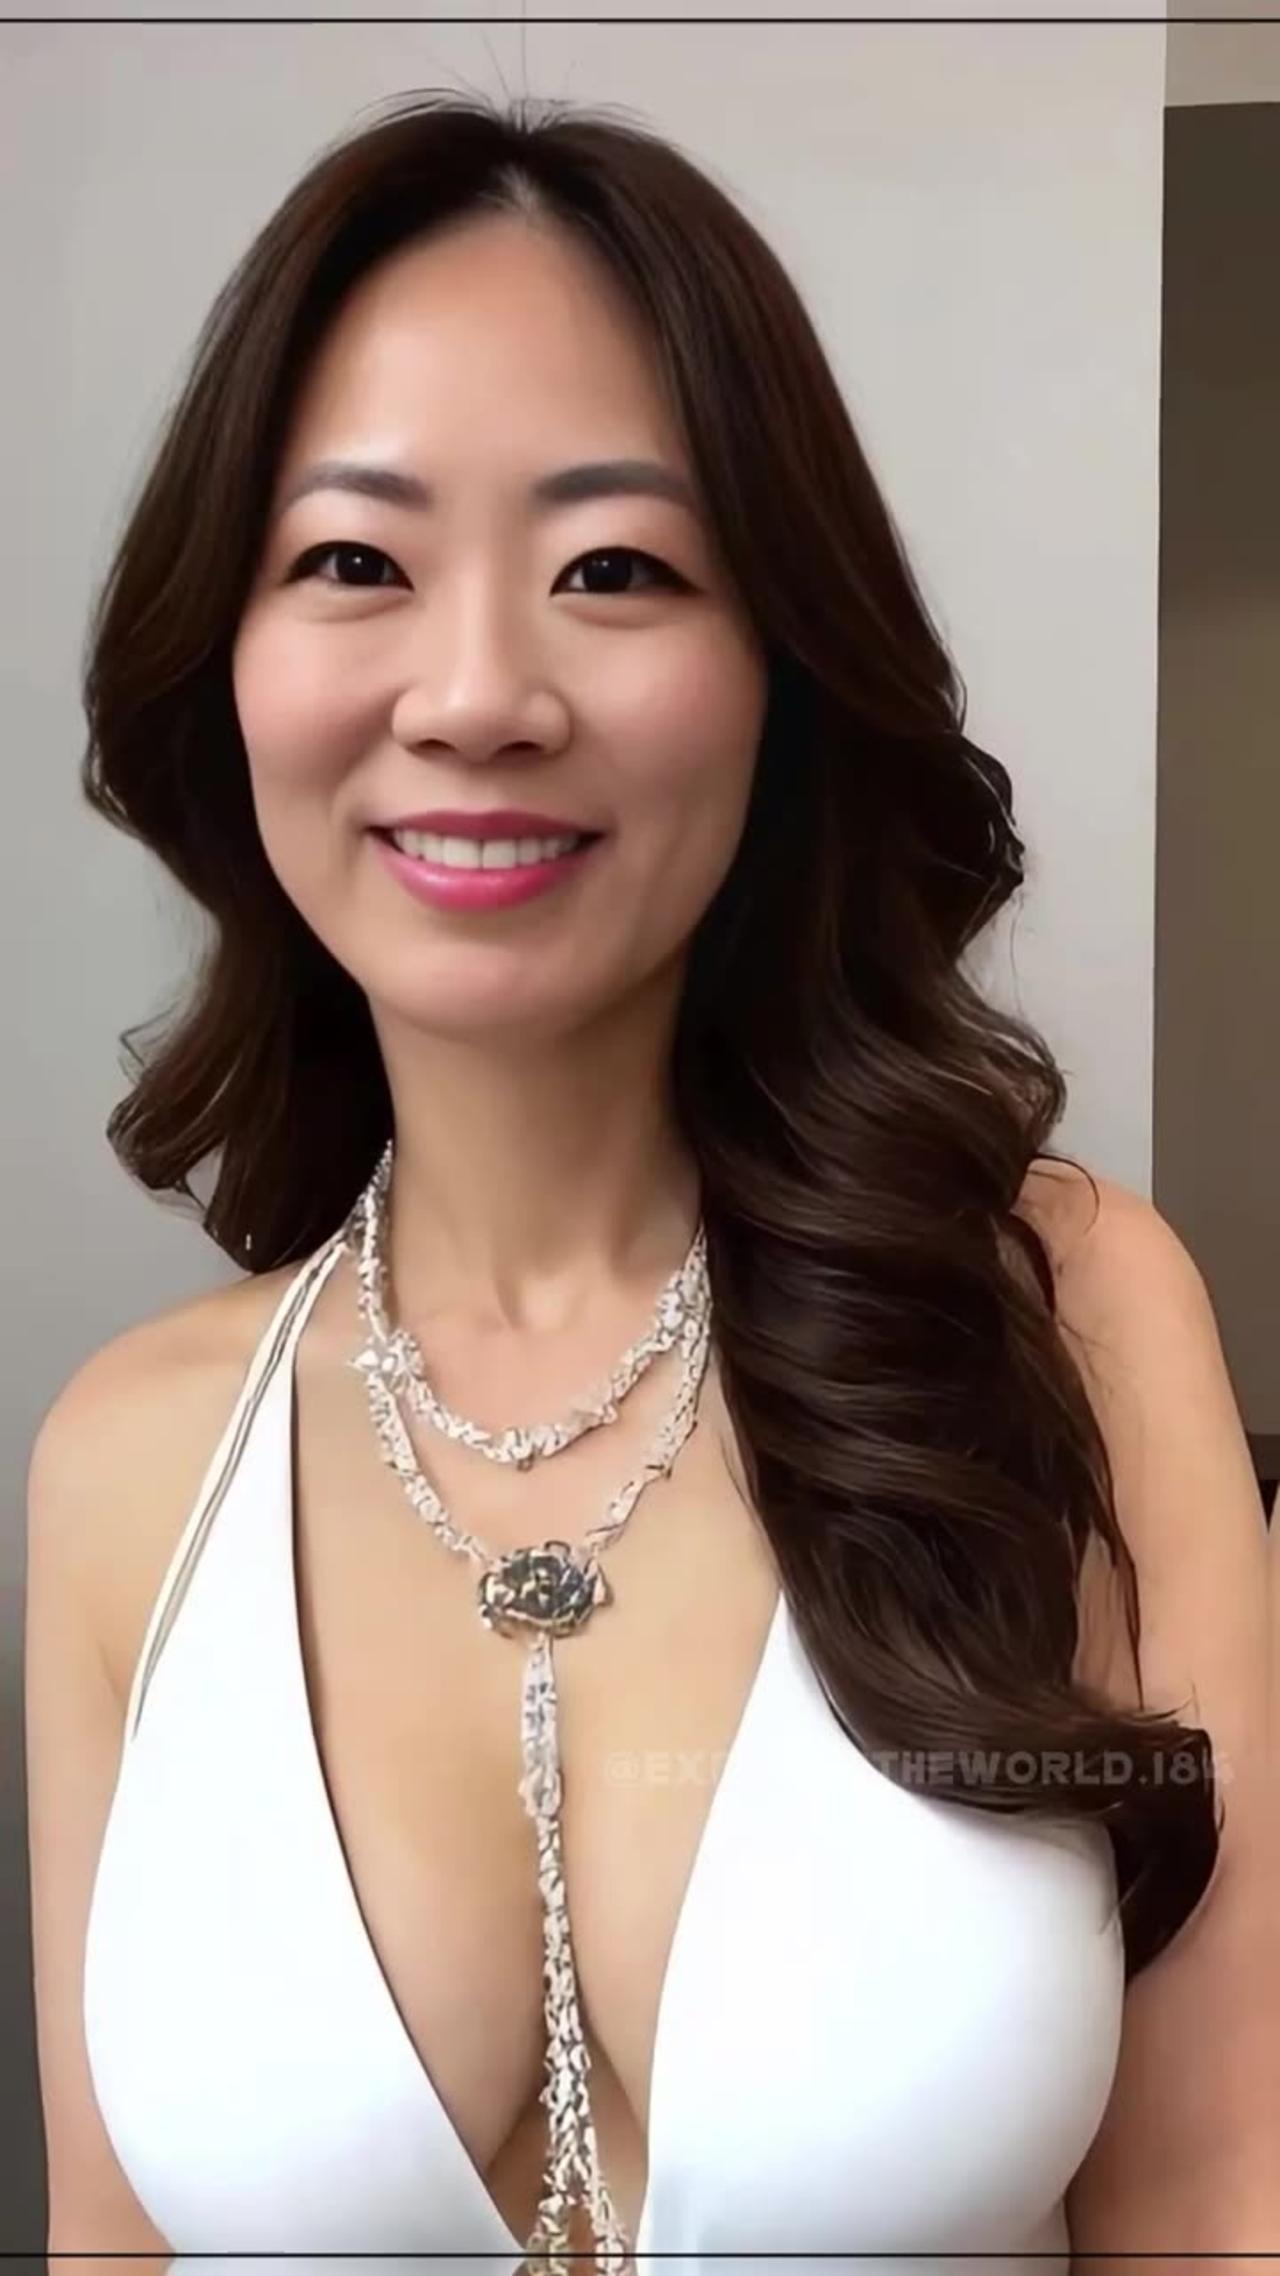 Japanese women under 40 years old wear luxurious outfits to highlight their bust.